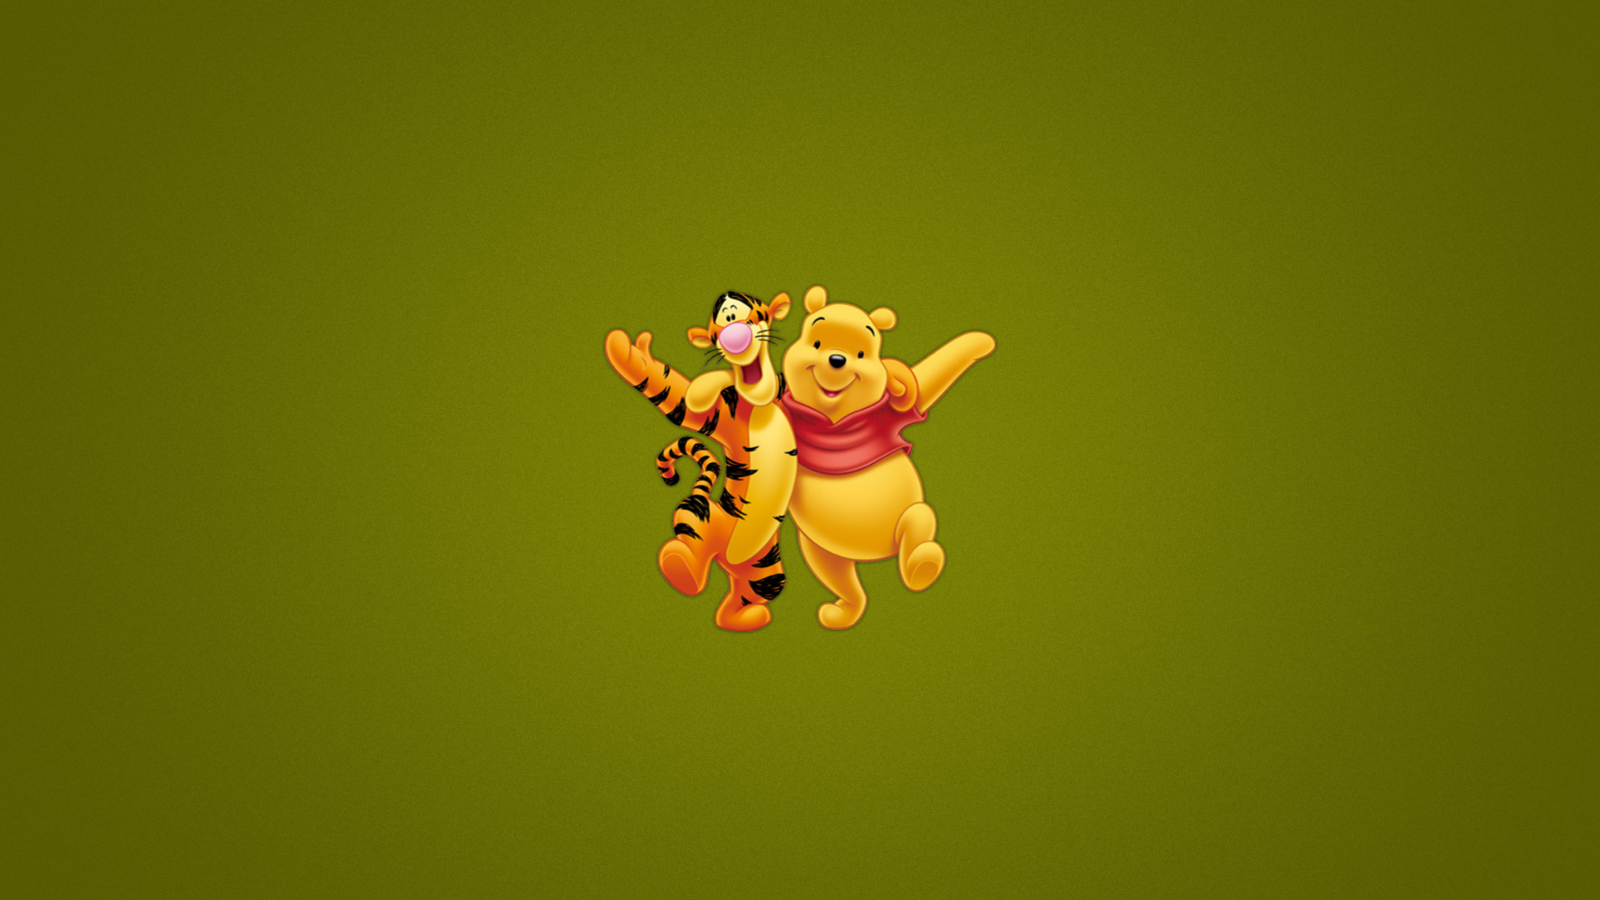 Winnie The Pooh And Tiger wallpaper 1600x900